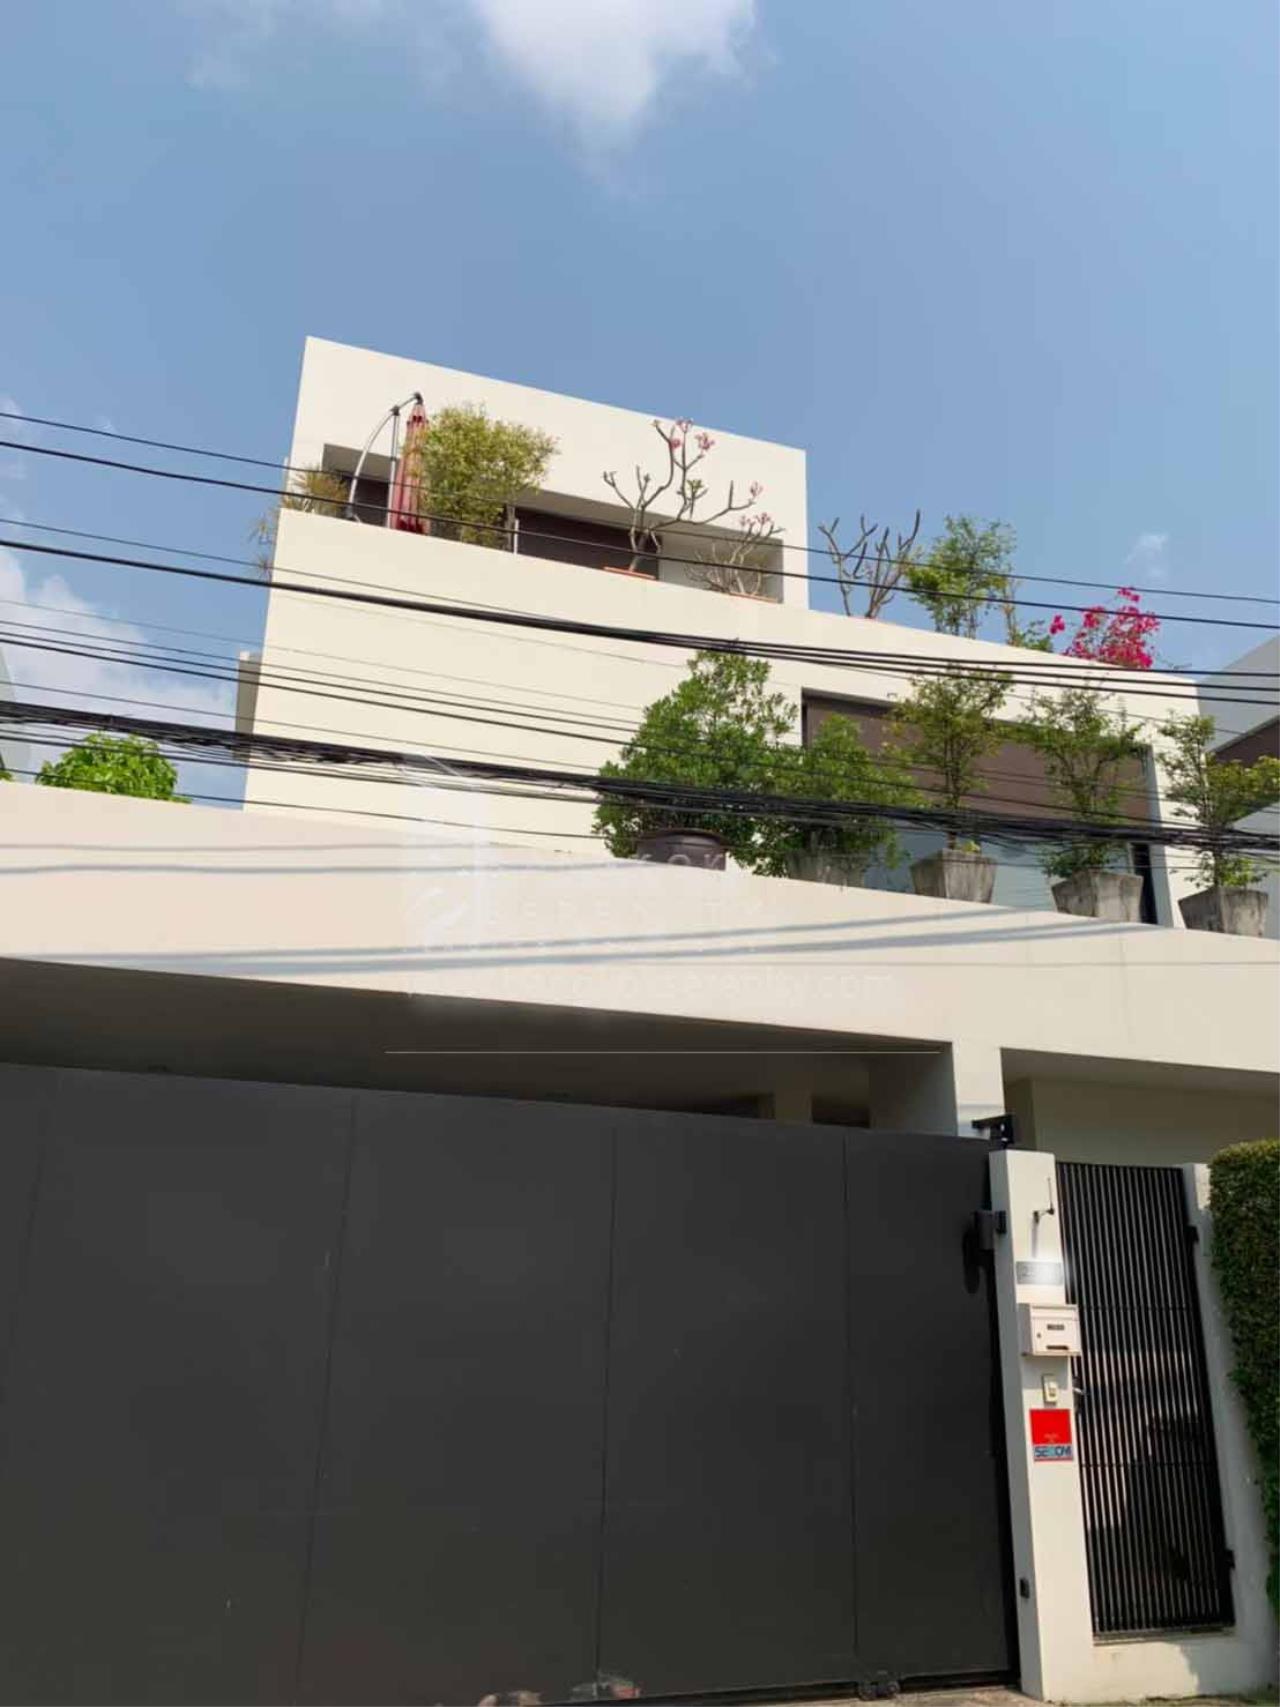 House for rent with private pool in Sukhumvit-Thonglor